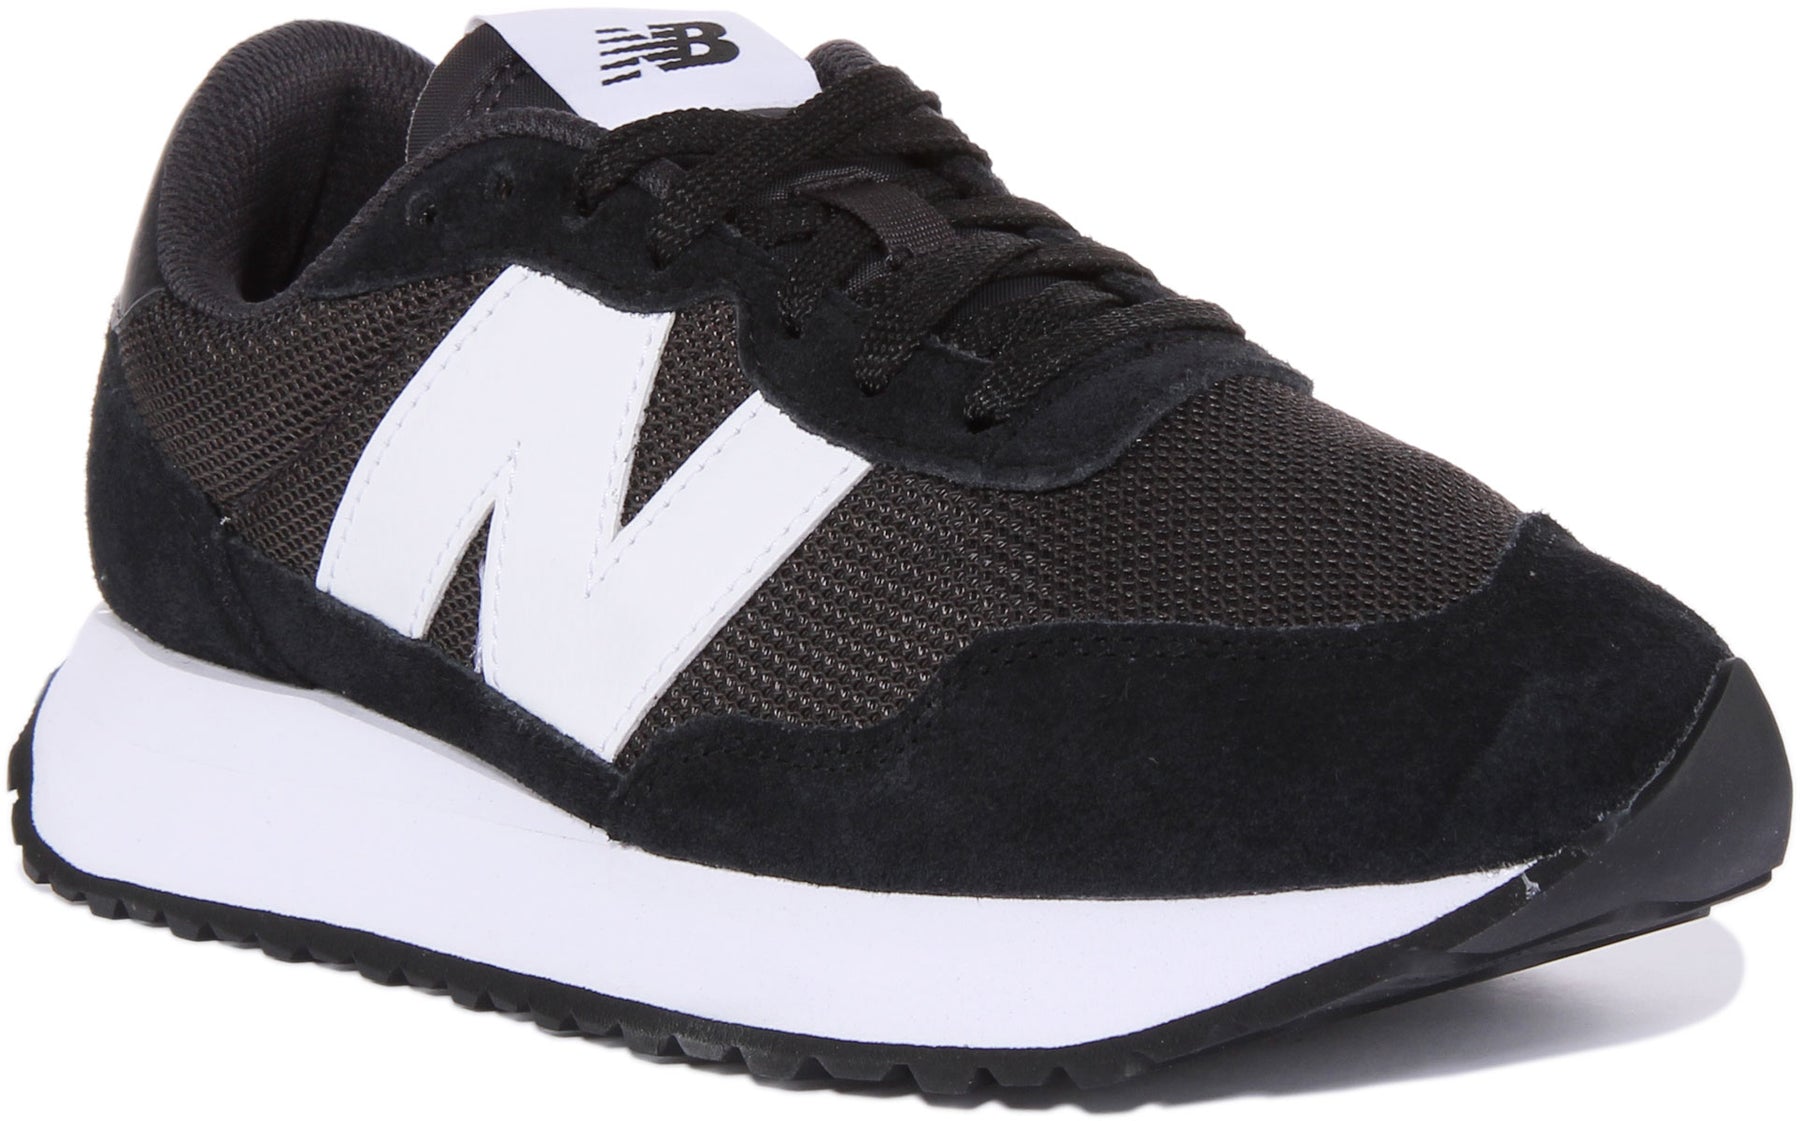 New Balance Ms237 In Black White | Lace up Retro Style Trainers ...